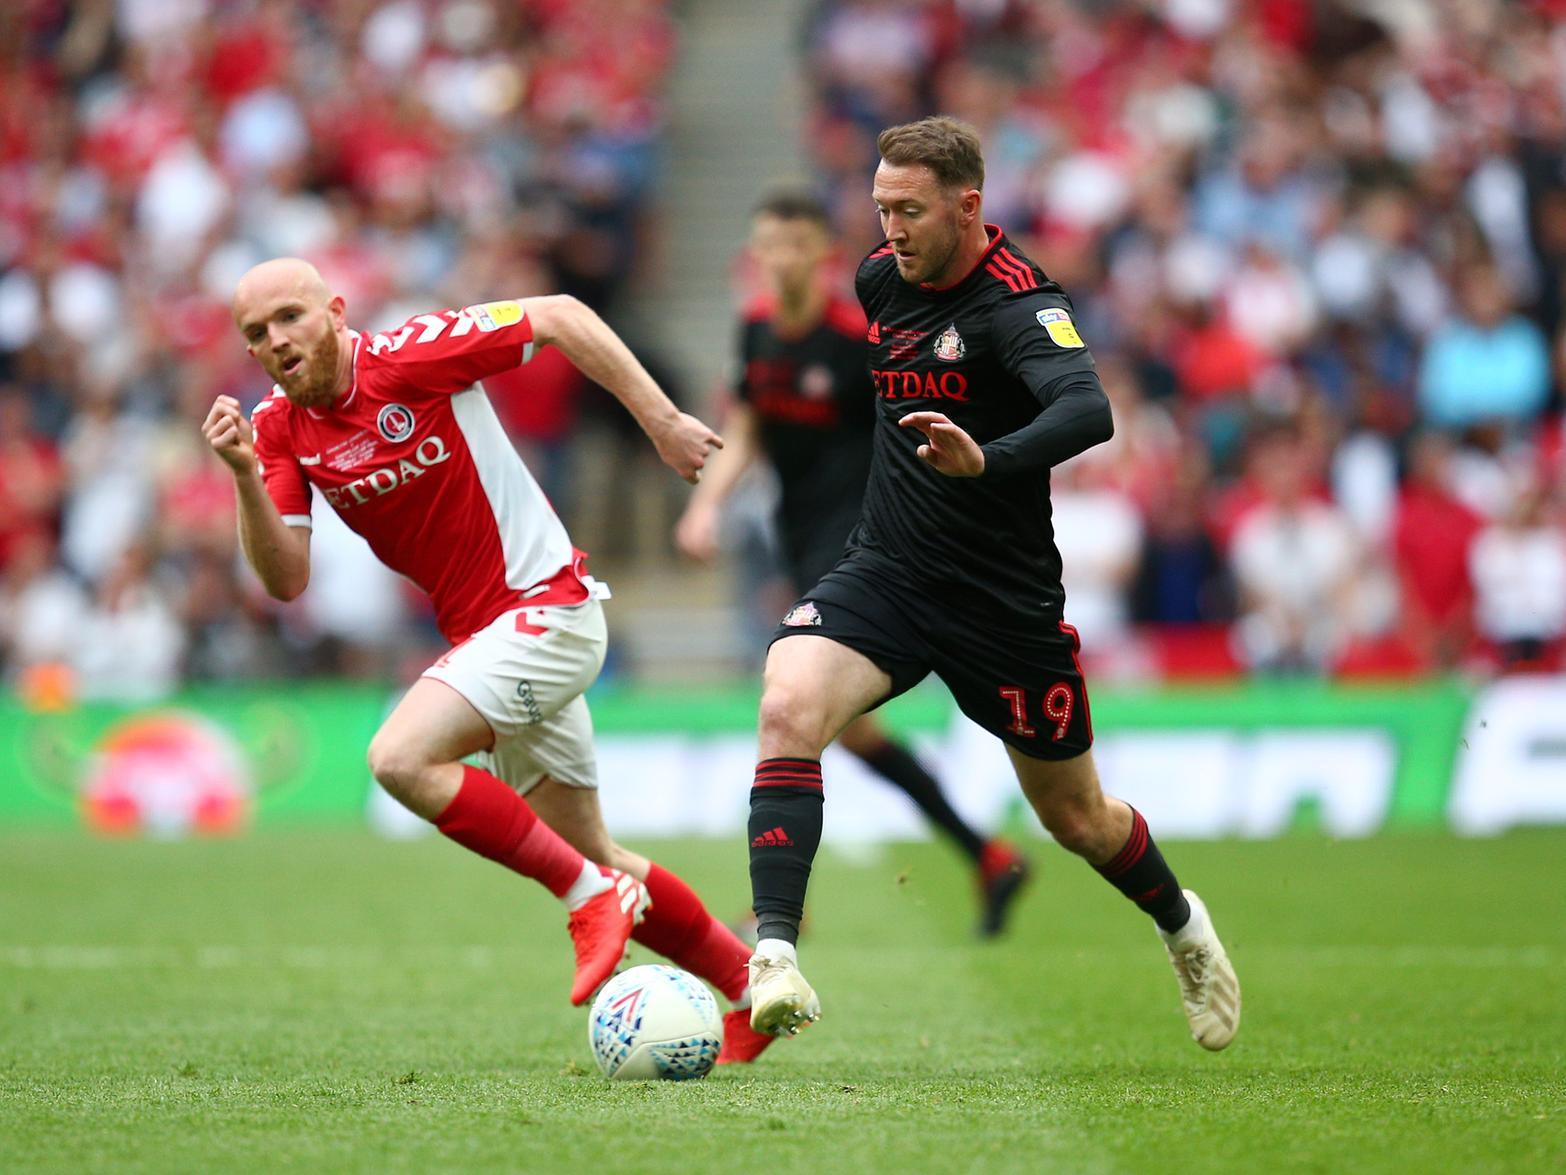 Aiden McGeady has described Charlton Athletic as being the ideal fit after joining the Addicks on loan from Sunderland in January.